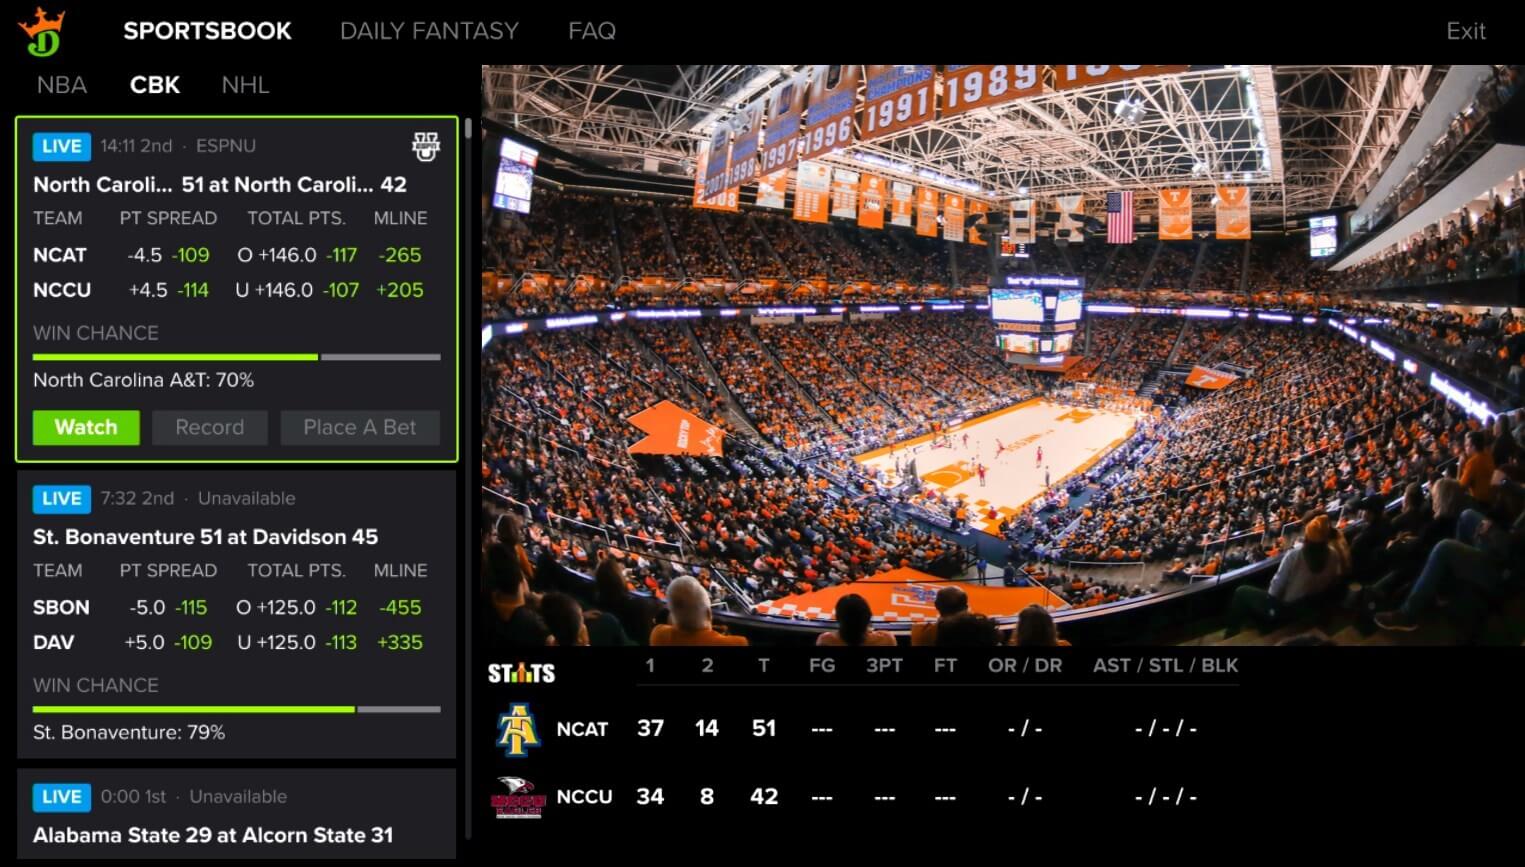 A screenshot showing live bet odds side-by-side with live footage on the DraftKings DISH Hopper platform.